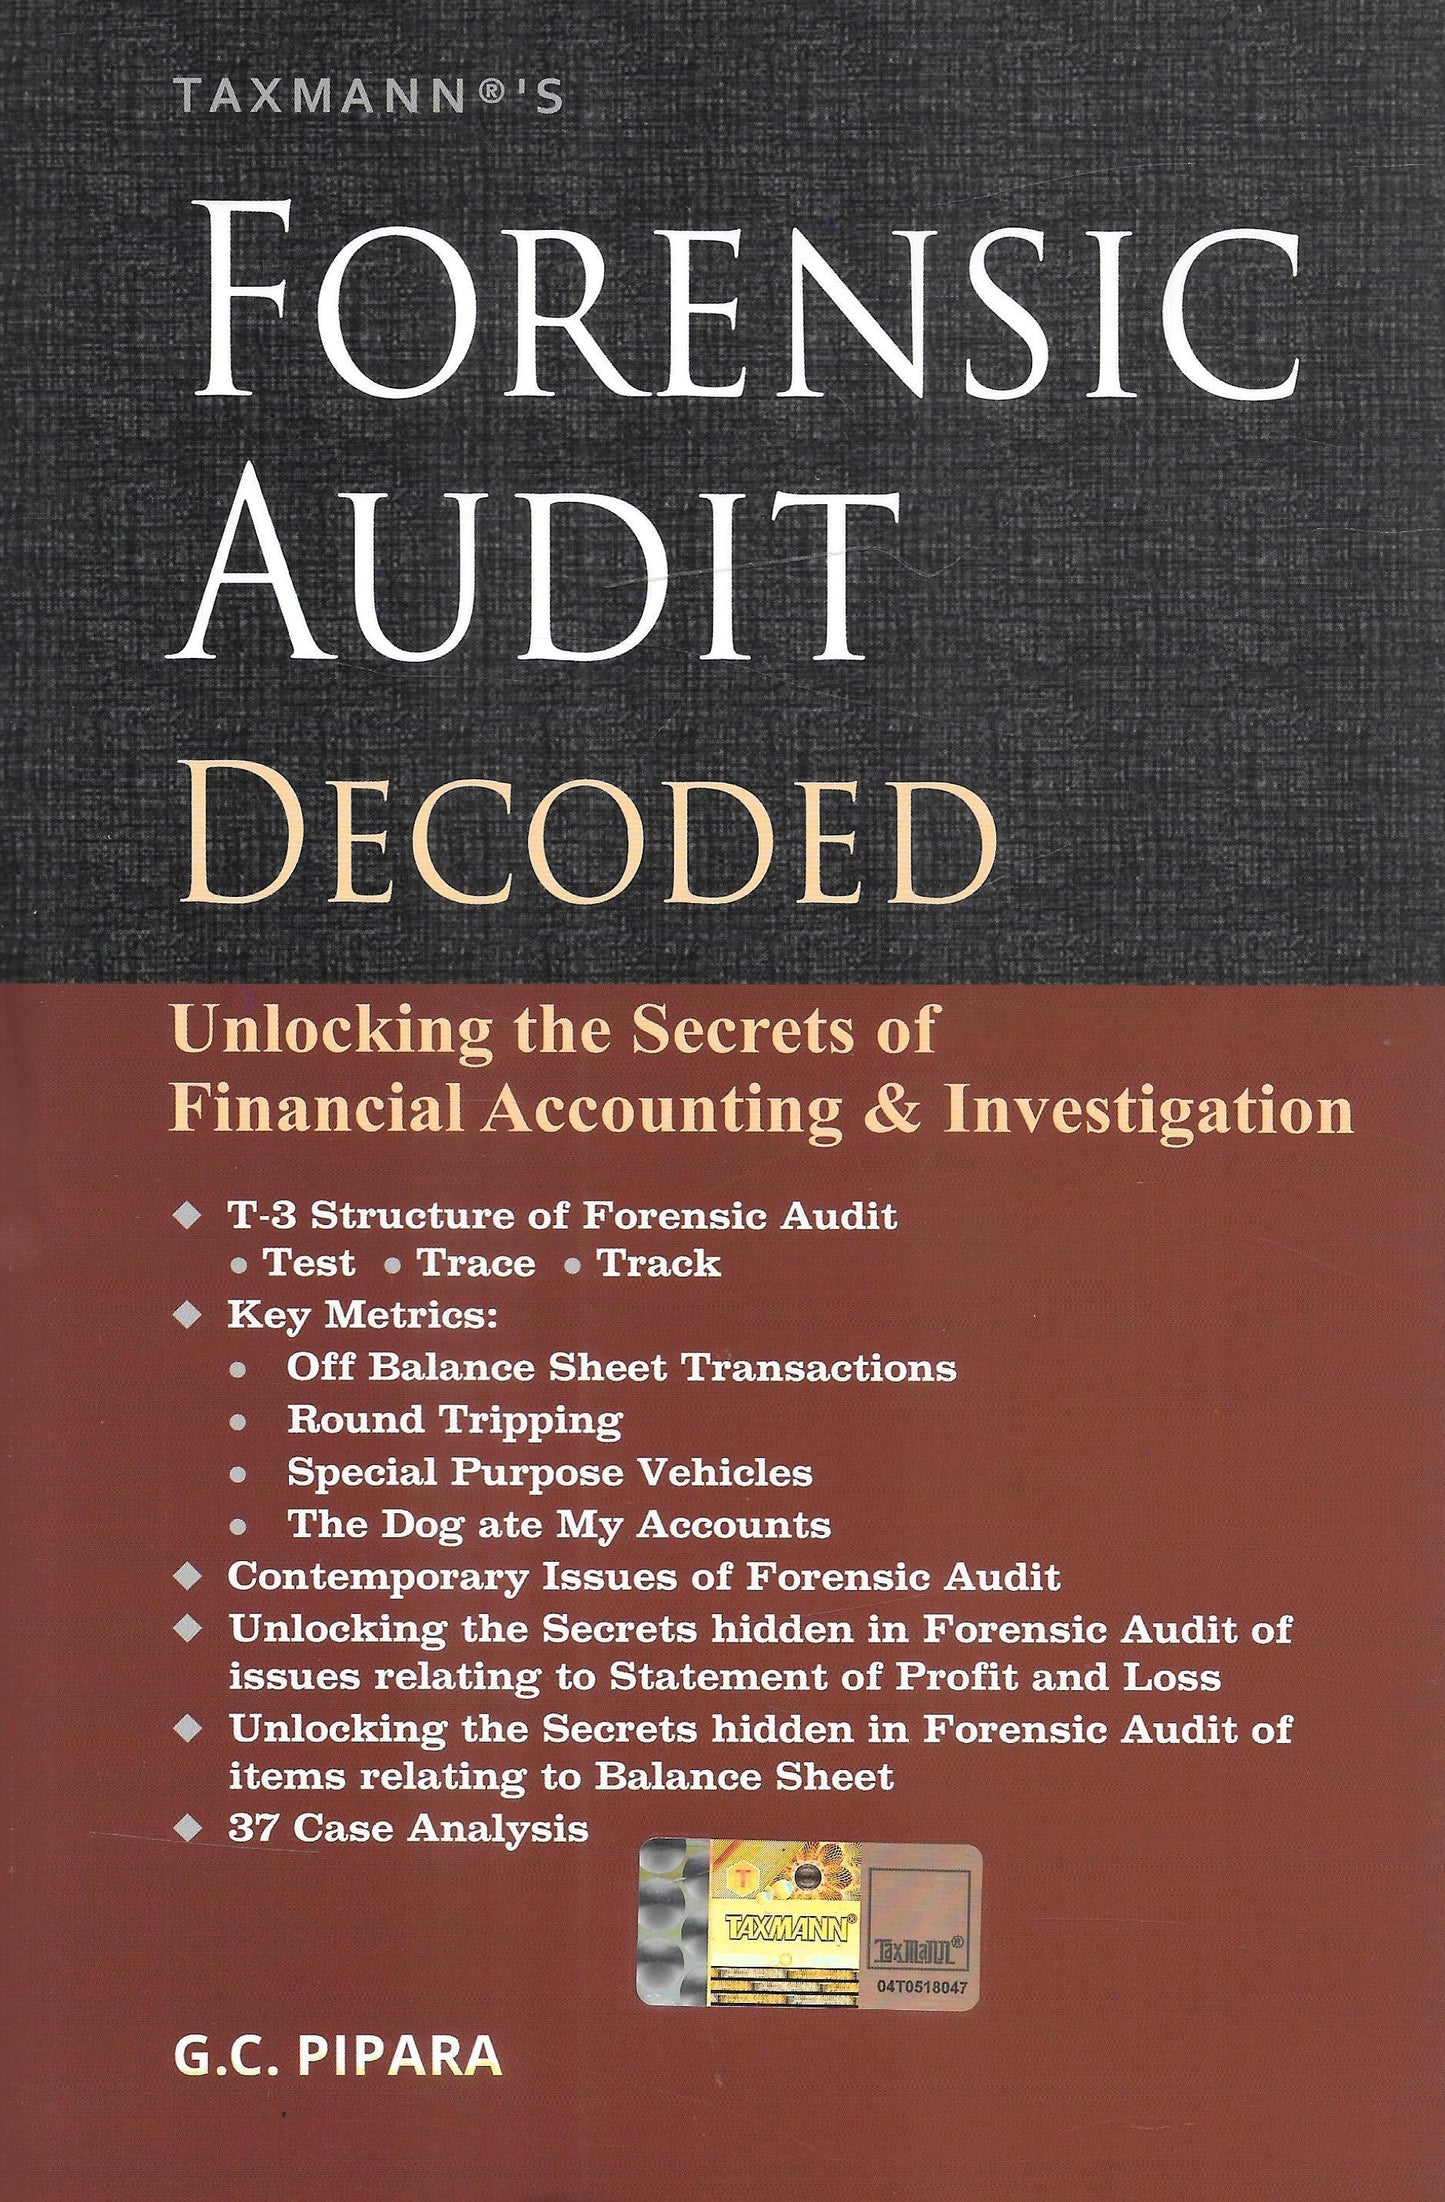 Forensic Audit Decoded - M&J Services